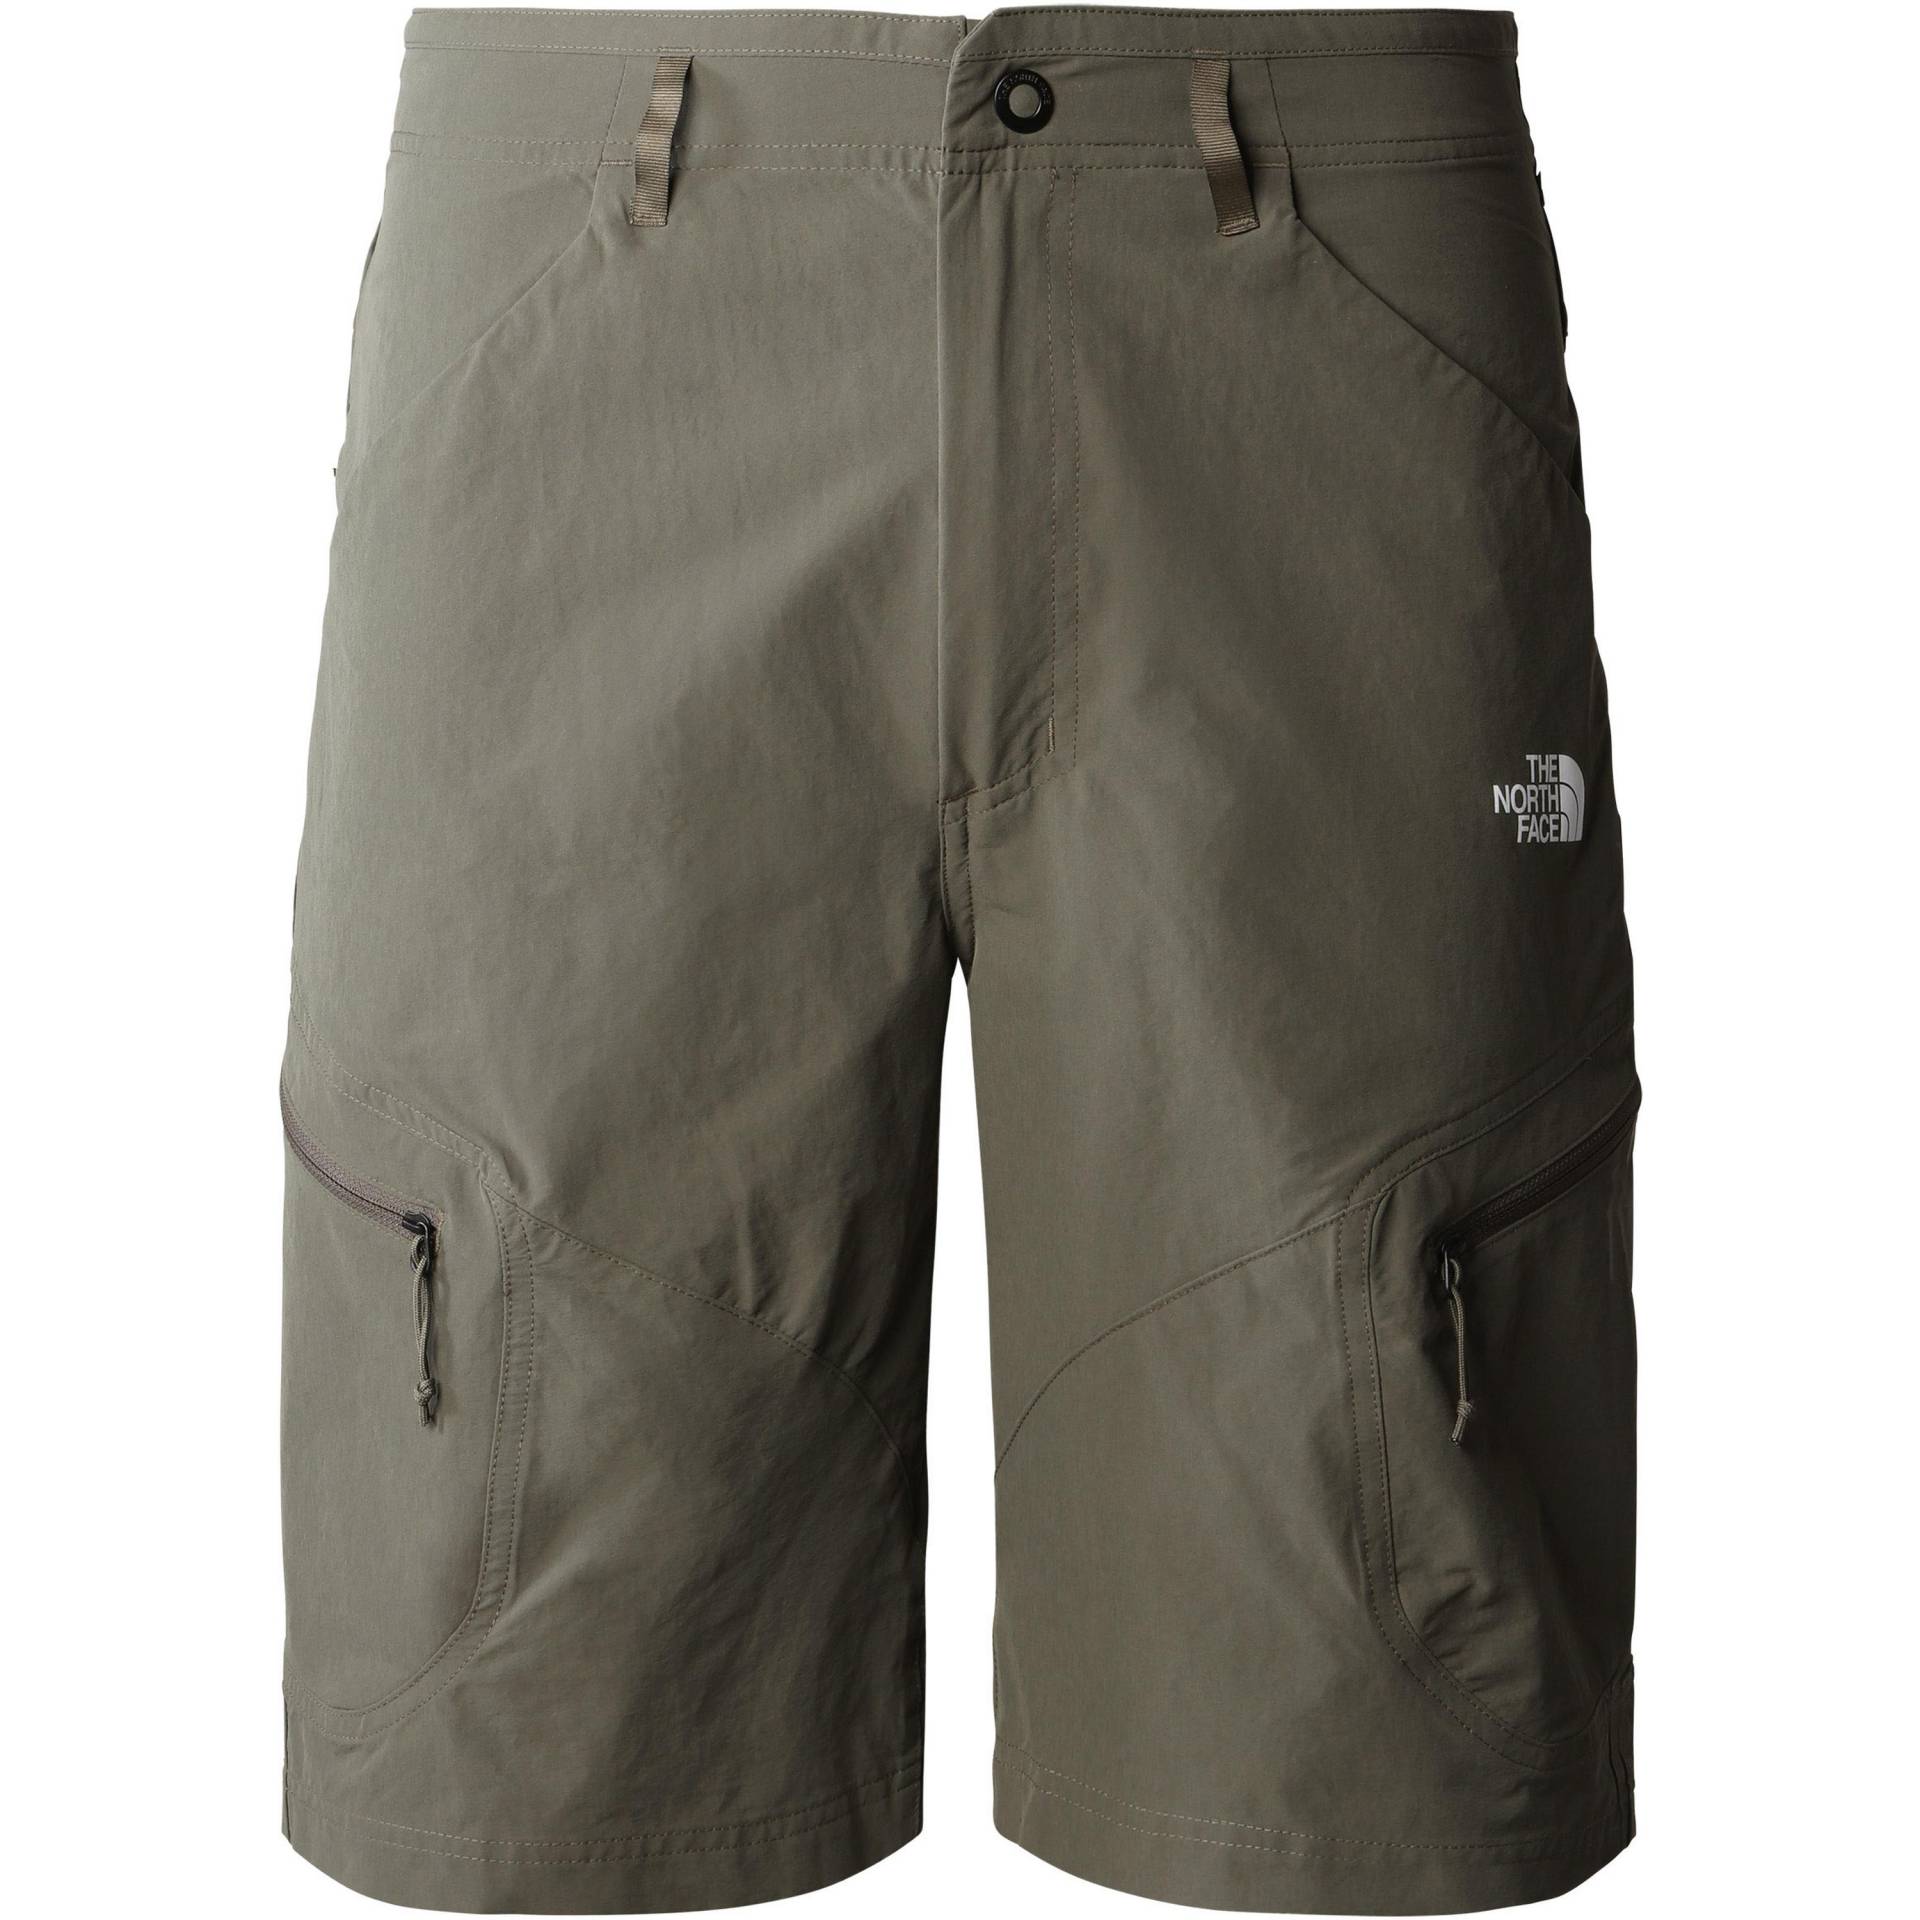 The North Face EXPLORATION Funktionsshorts Herren